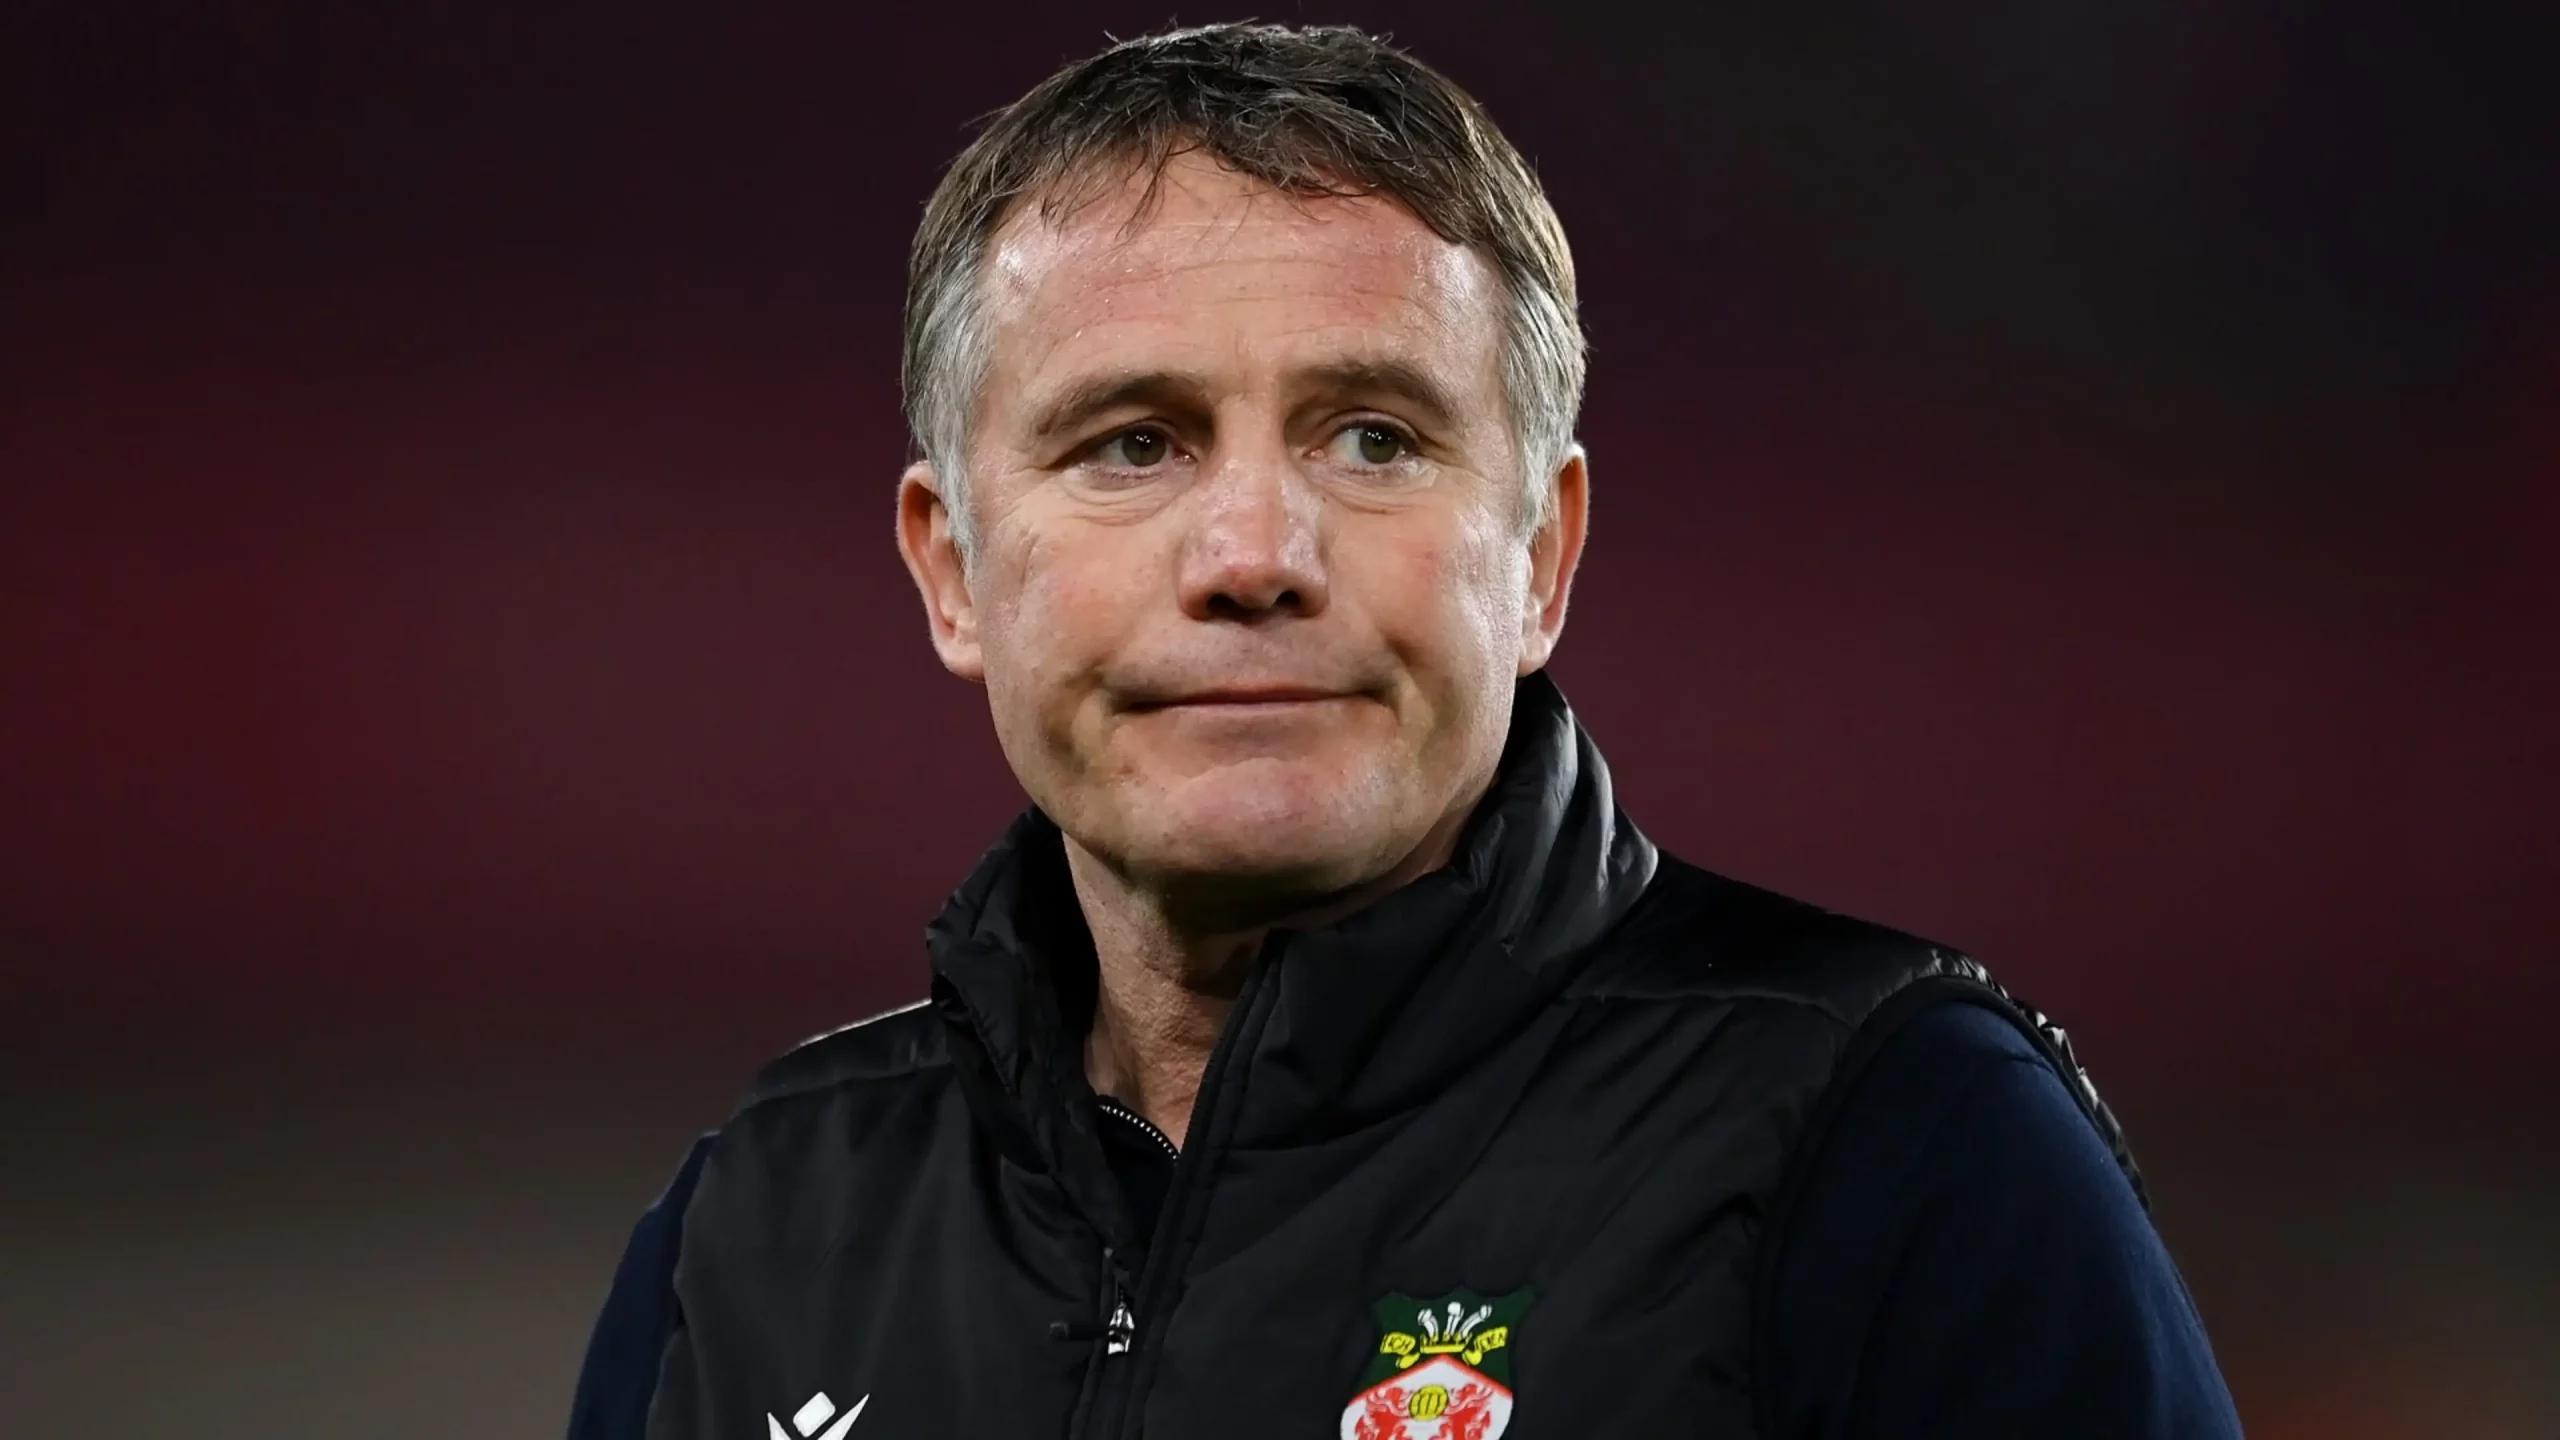 Wrexham Coach Angry with Paul Mullin After Player Was involved in…